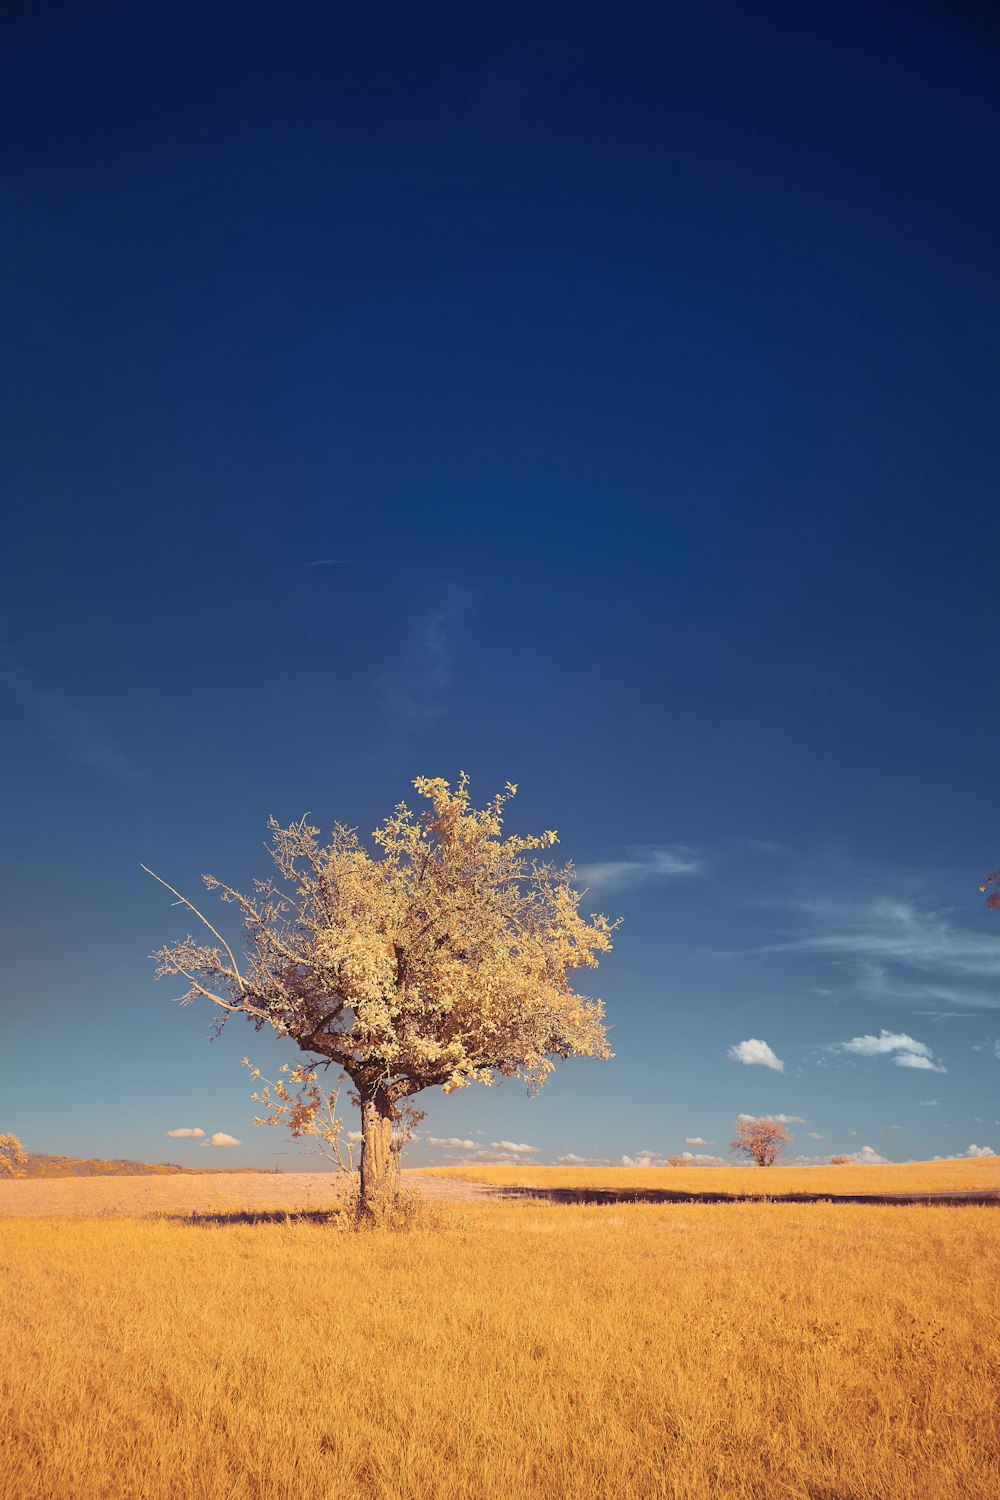 leafless tree on brown field under blue sky during daytime